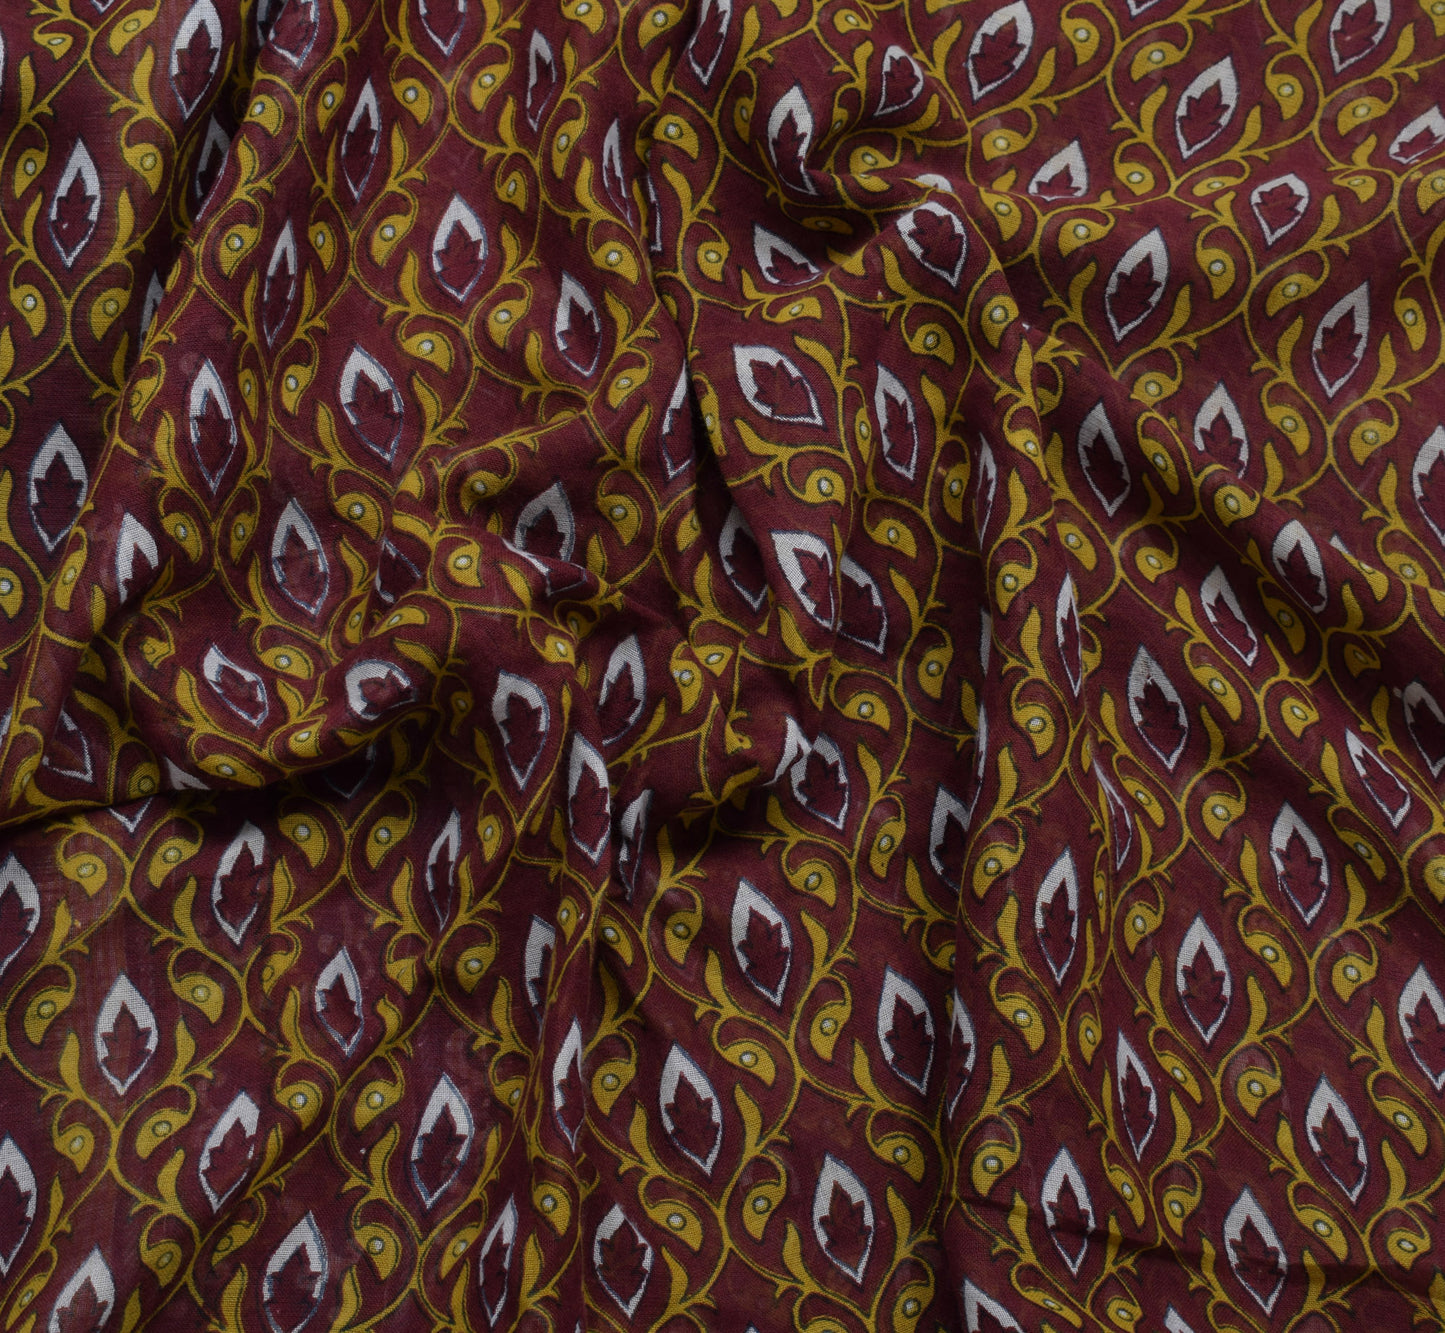 Sushila Vintage Brown Saree 100% Pure Cotton Printed Floral Soft Craft Fabric